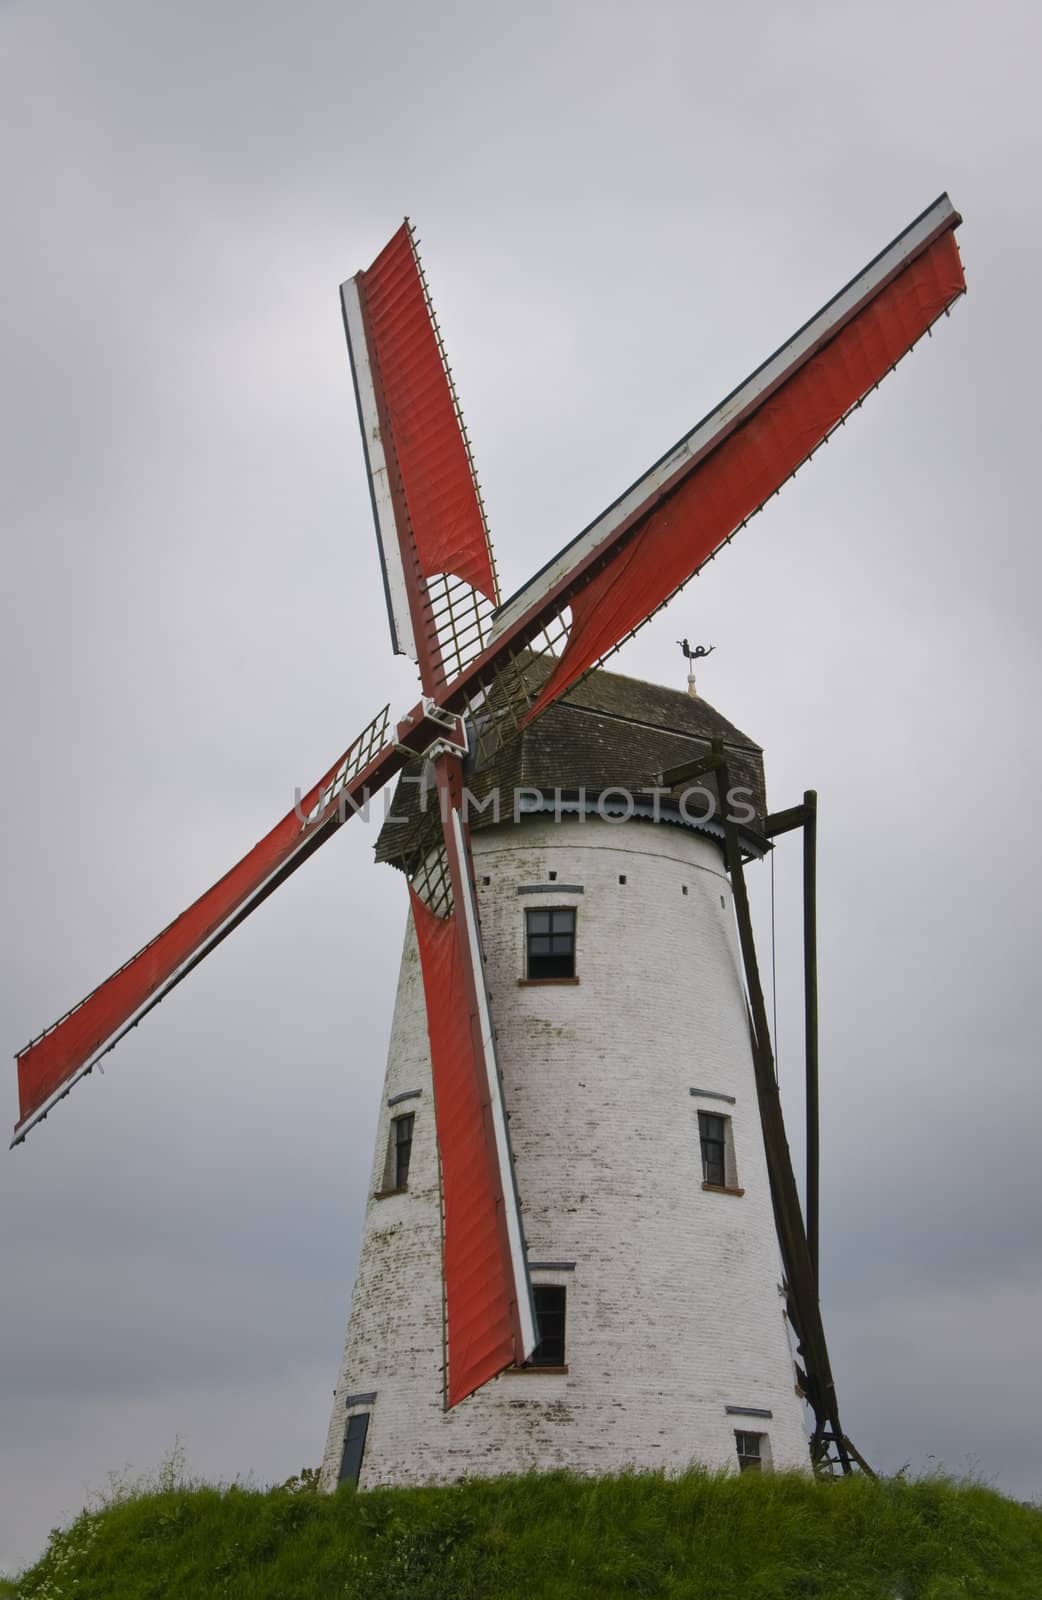 Windmill close-up by Claudine